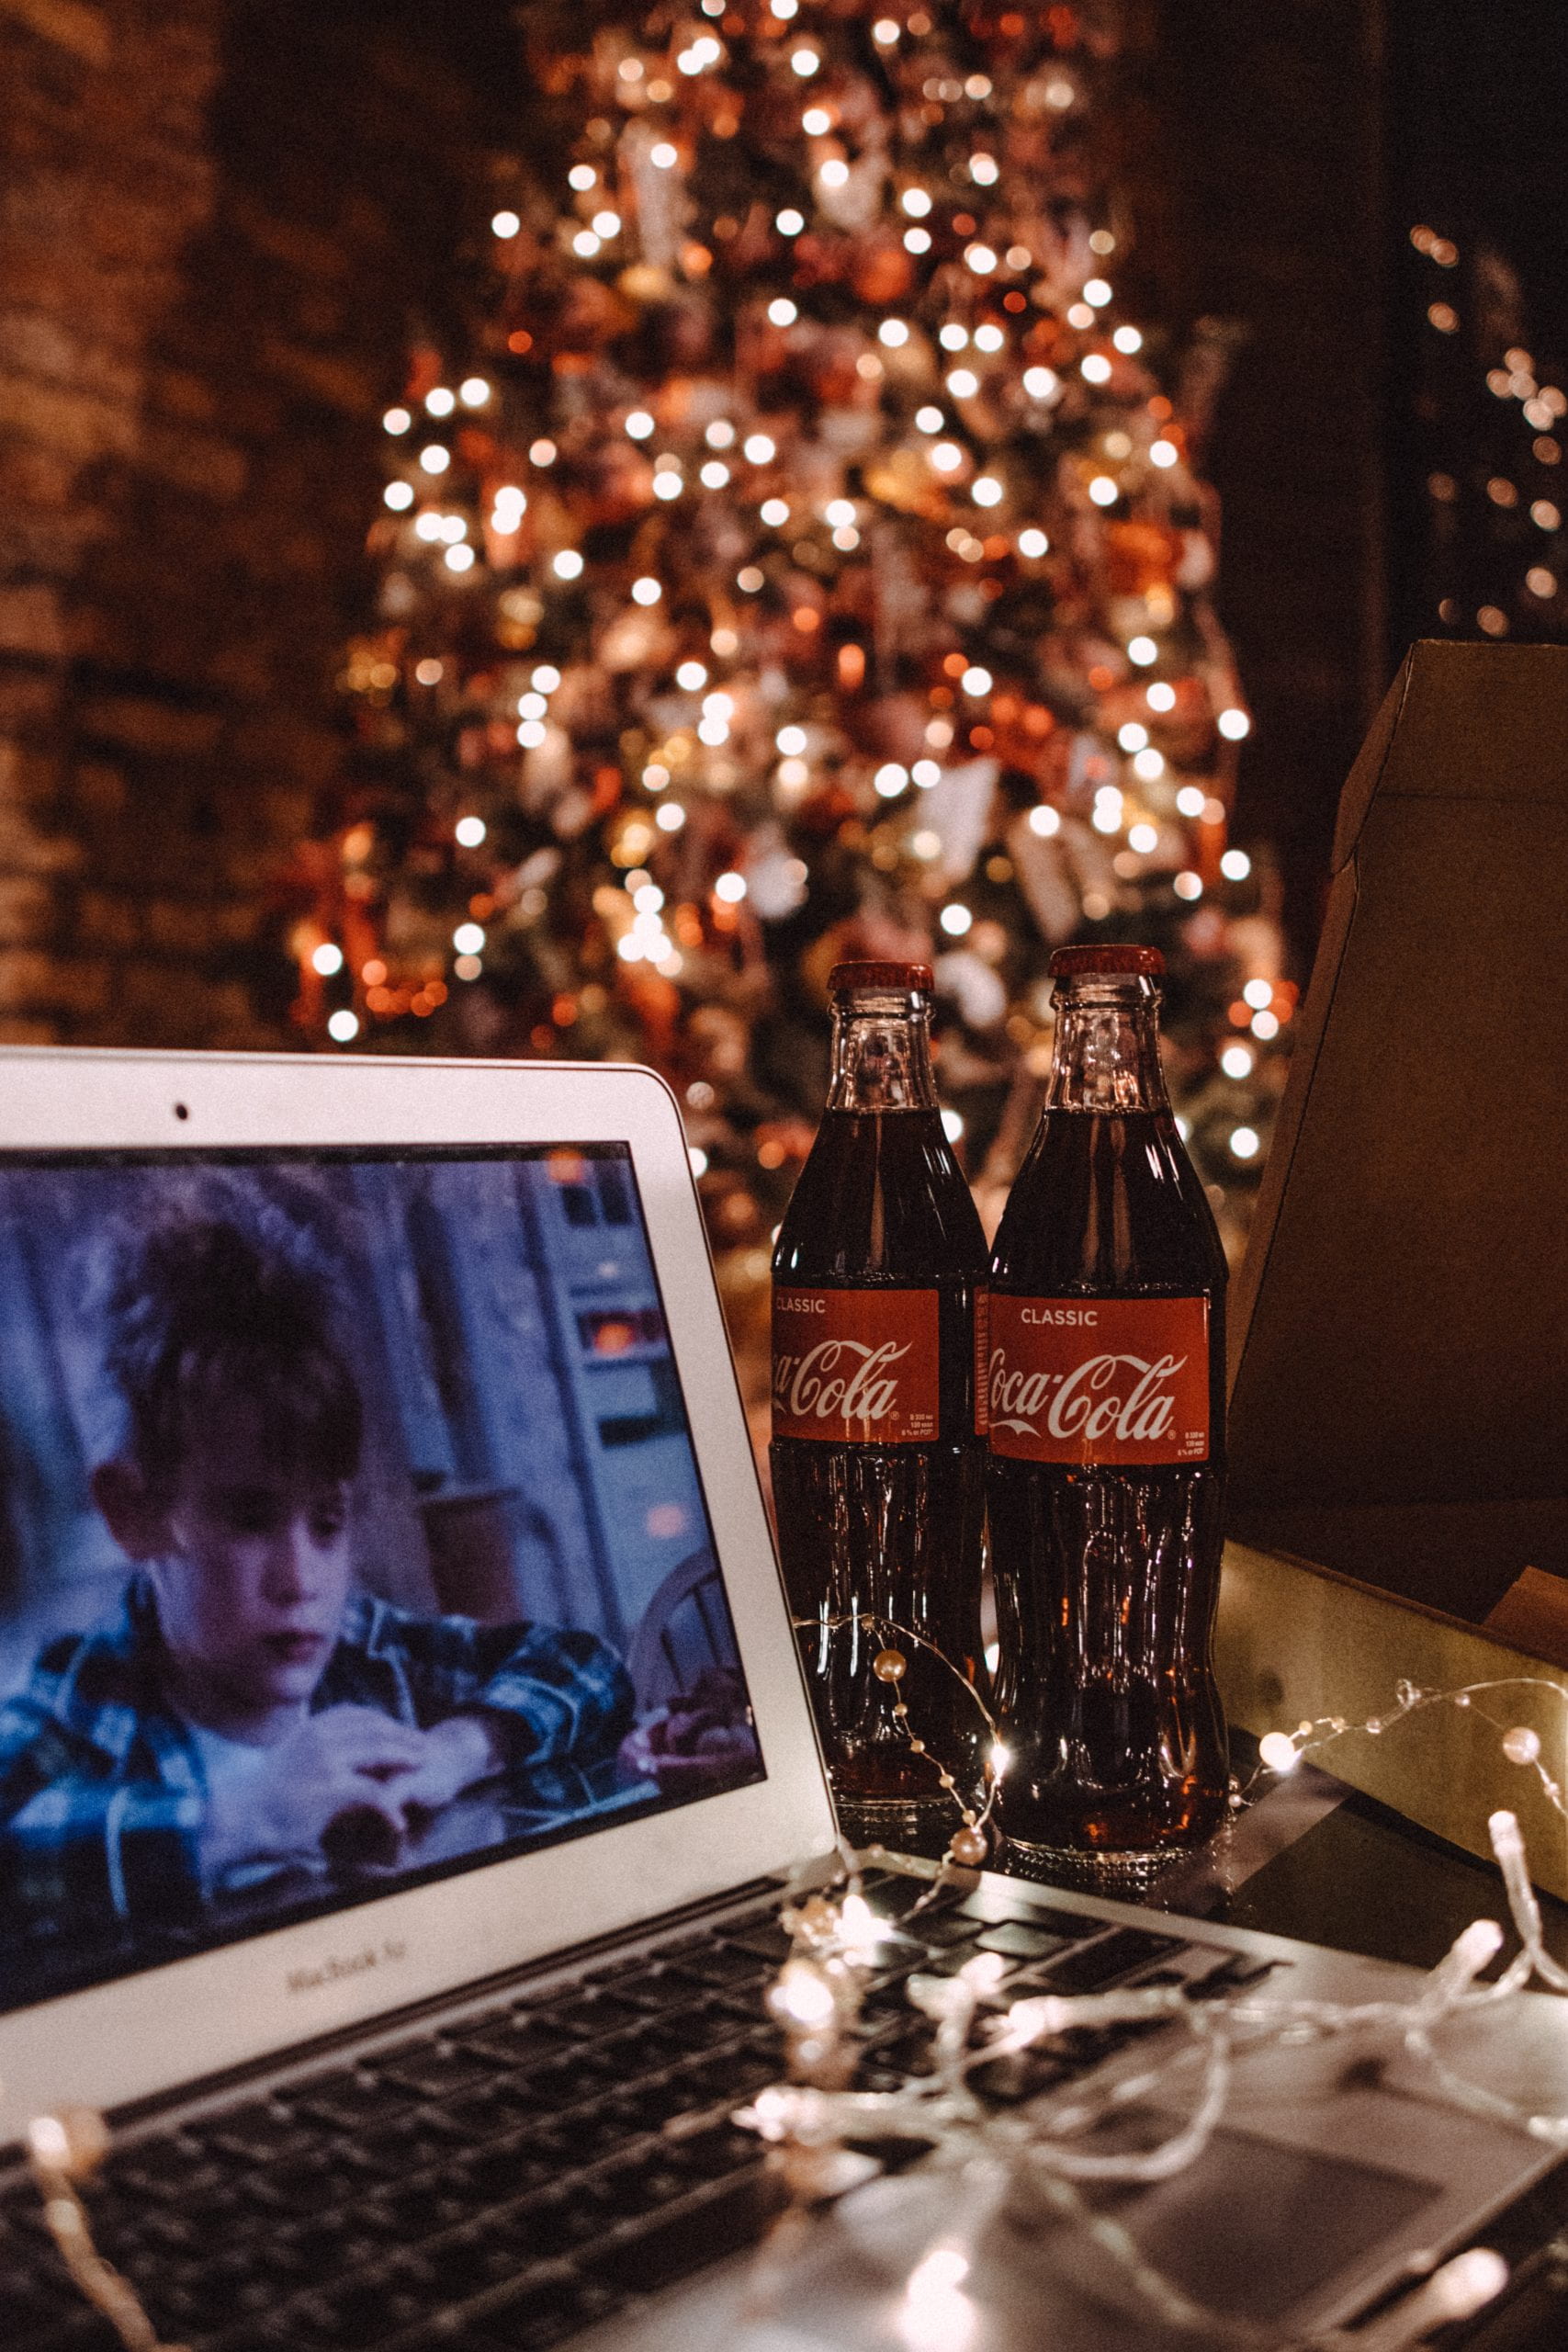 A laptop set up watching the movie Home Alone, Coca Cola (Coke) in the foreground and a brightly lit Christmas tree in the background.